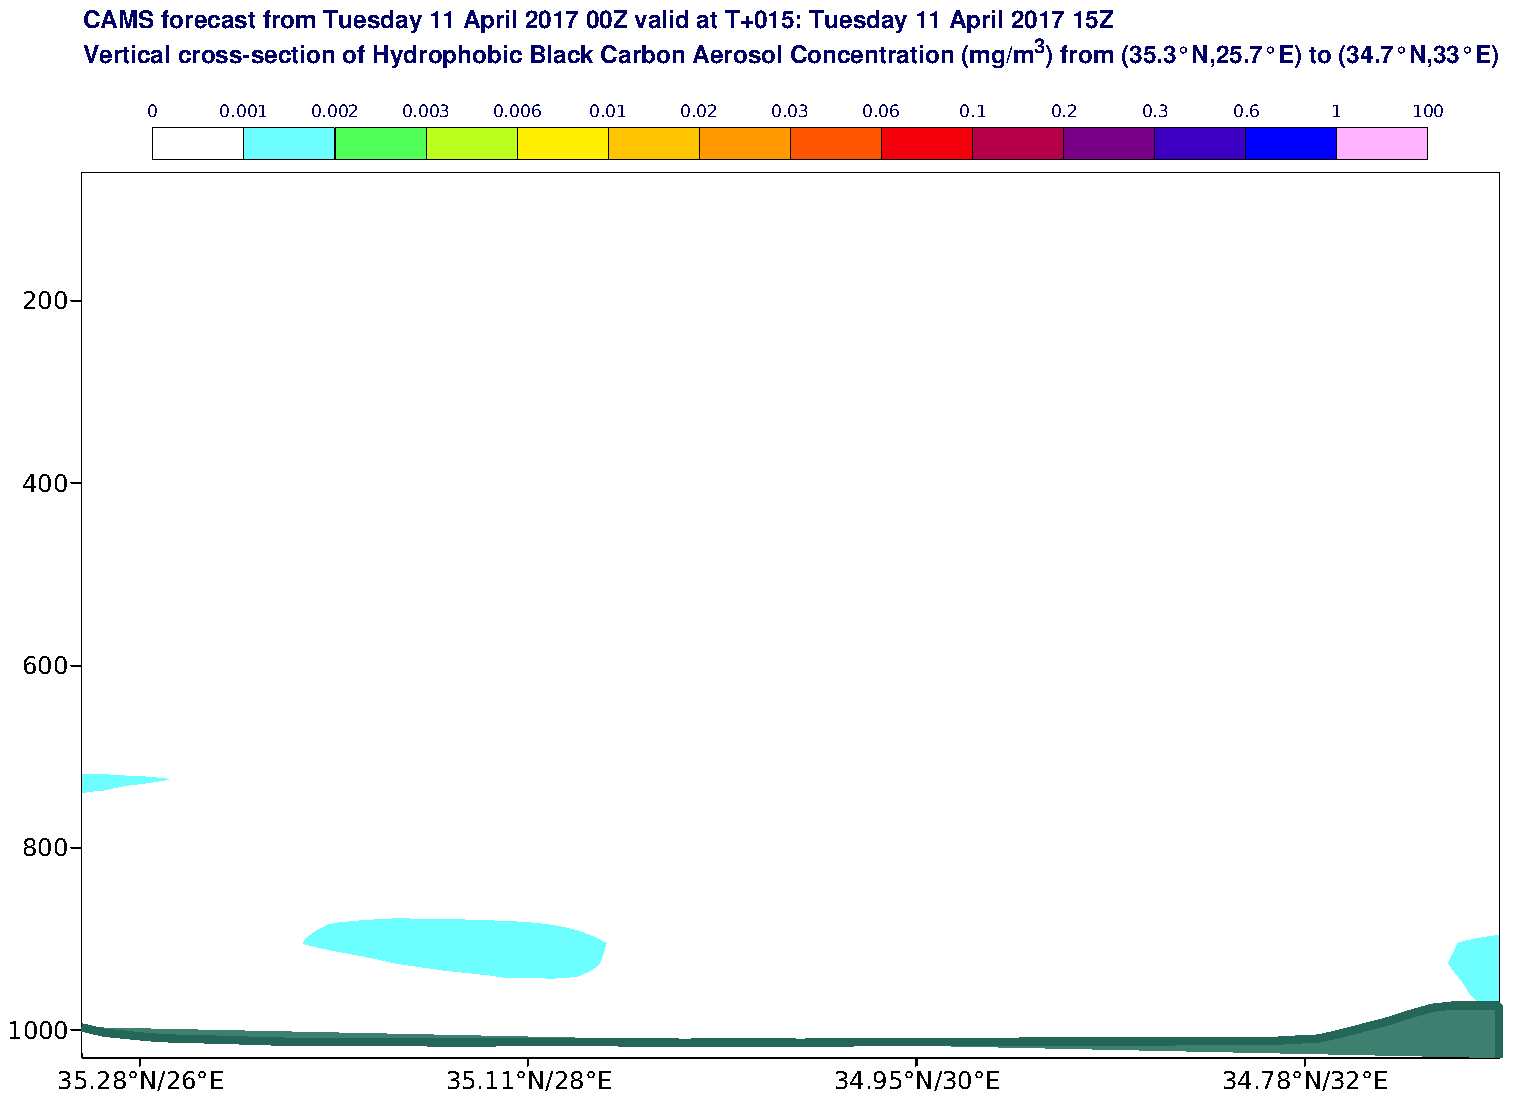 Vertical cross-section of Hydrophobic Black Carbon Aerosol Concentration (mg/m3) valid at T15 - 2017-04-11 15:00